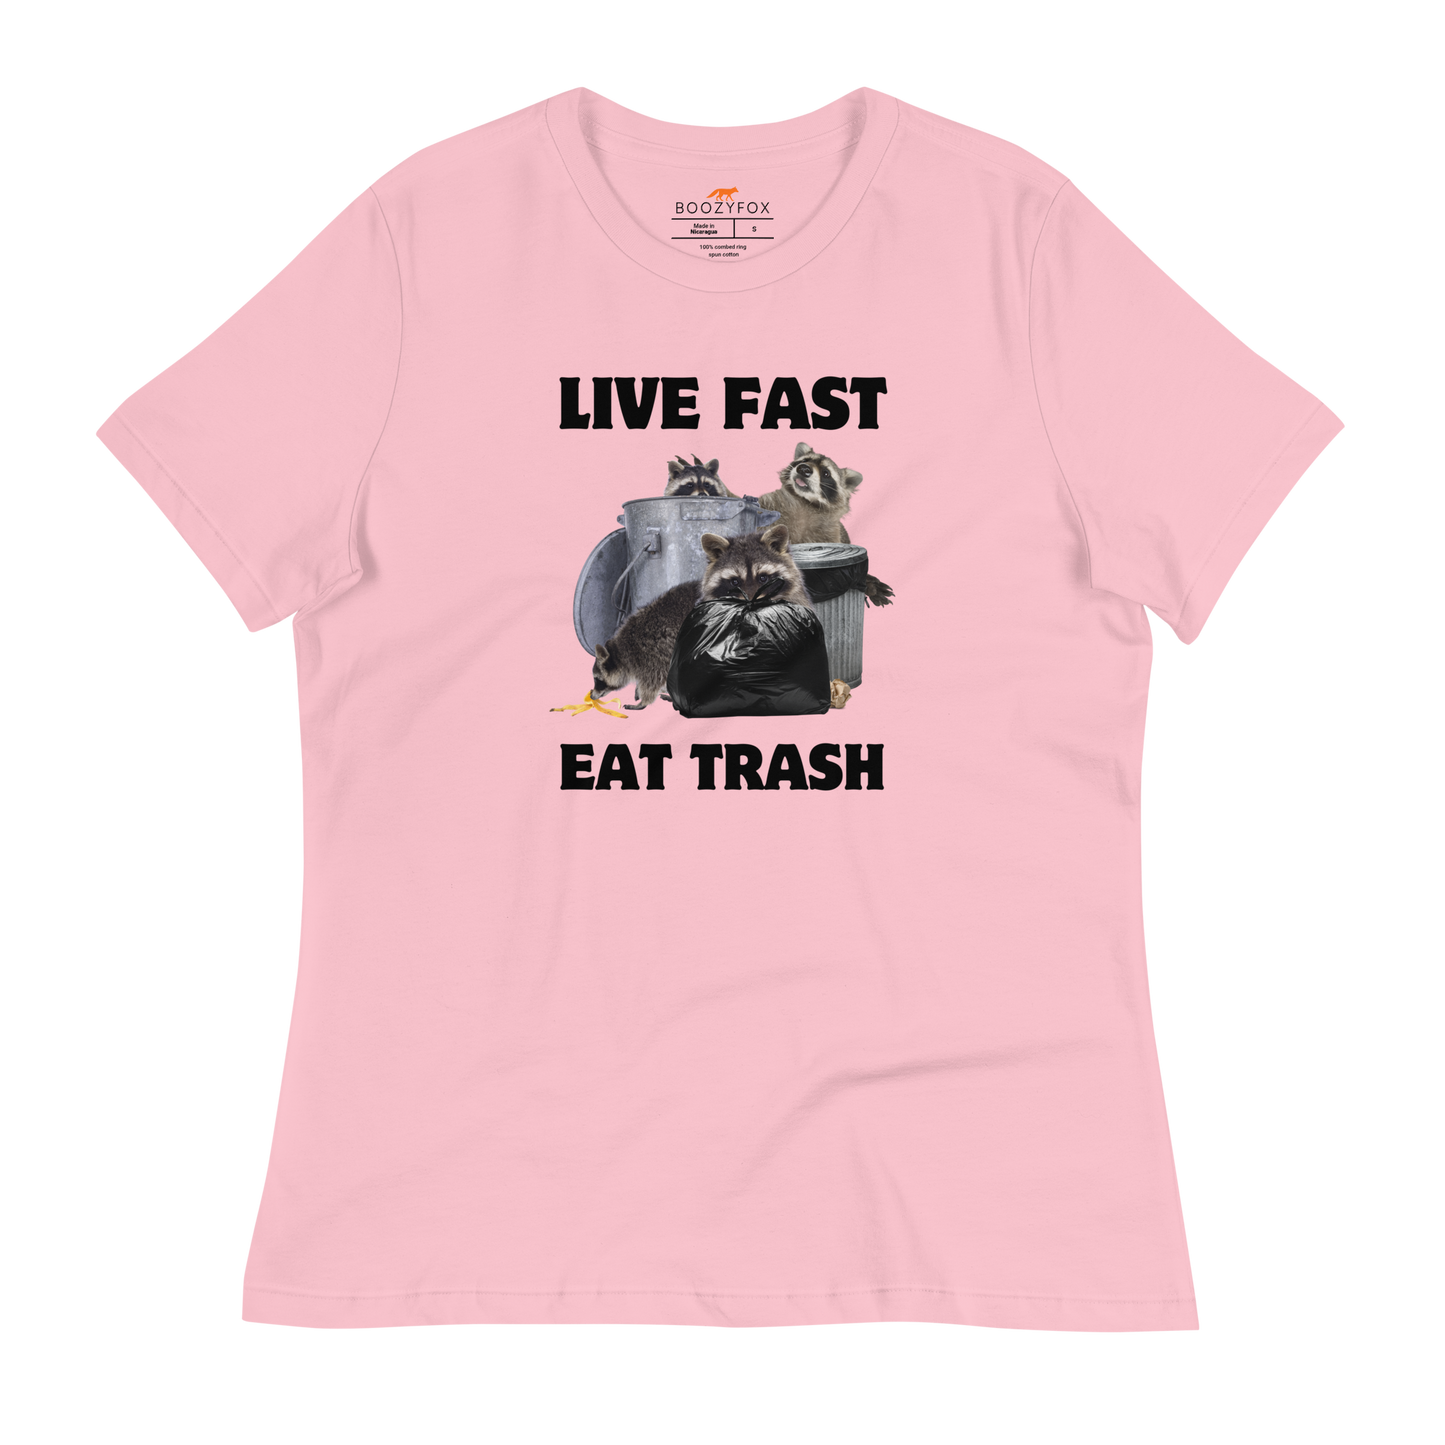 Women's Pink Raccoon T-Shirt featuring a hilarious Live Fast Eat Trash graphic on the chest - Women's Funny Graphic Raccoon Tees - Boozy Fox